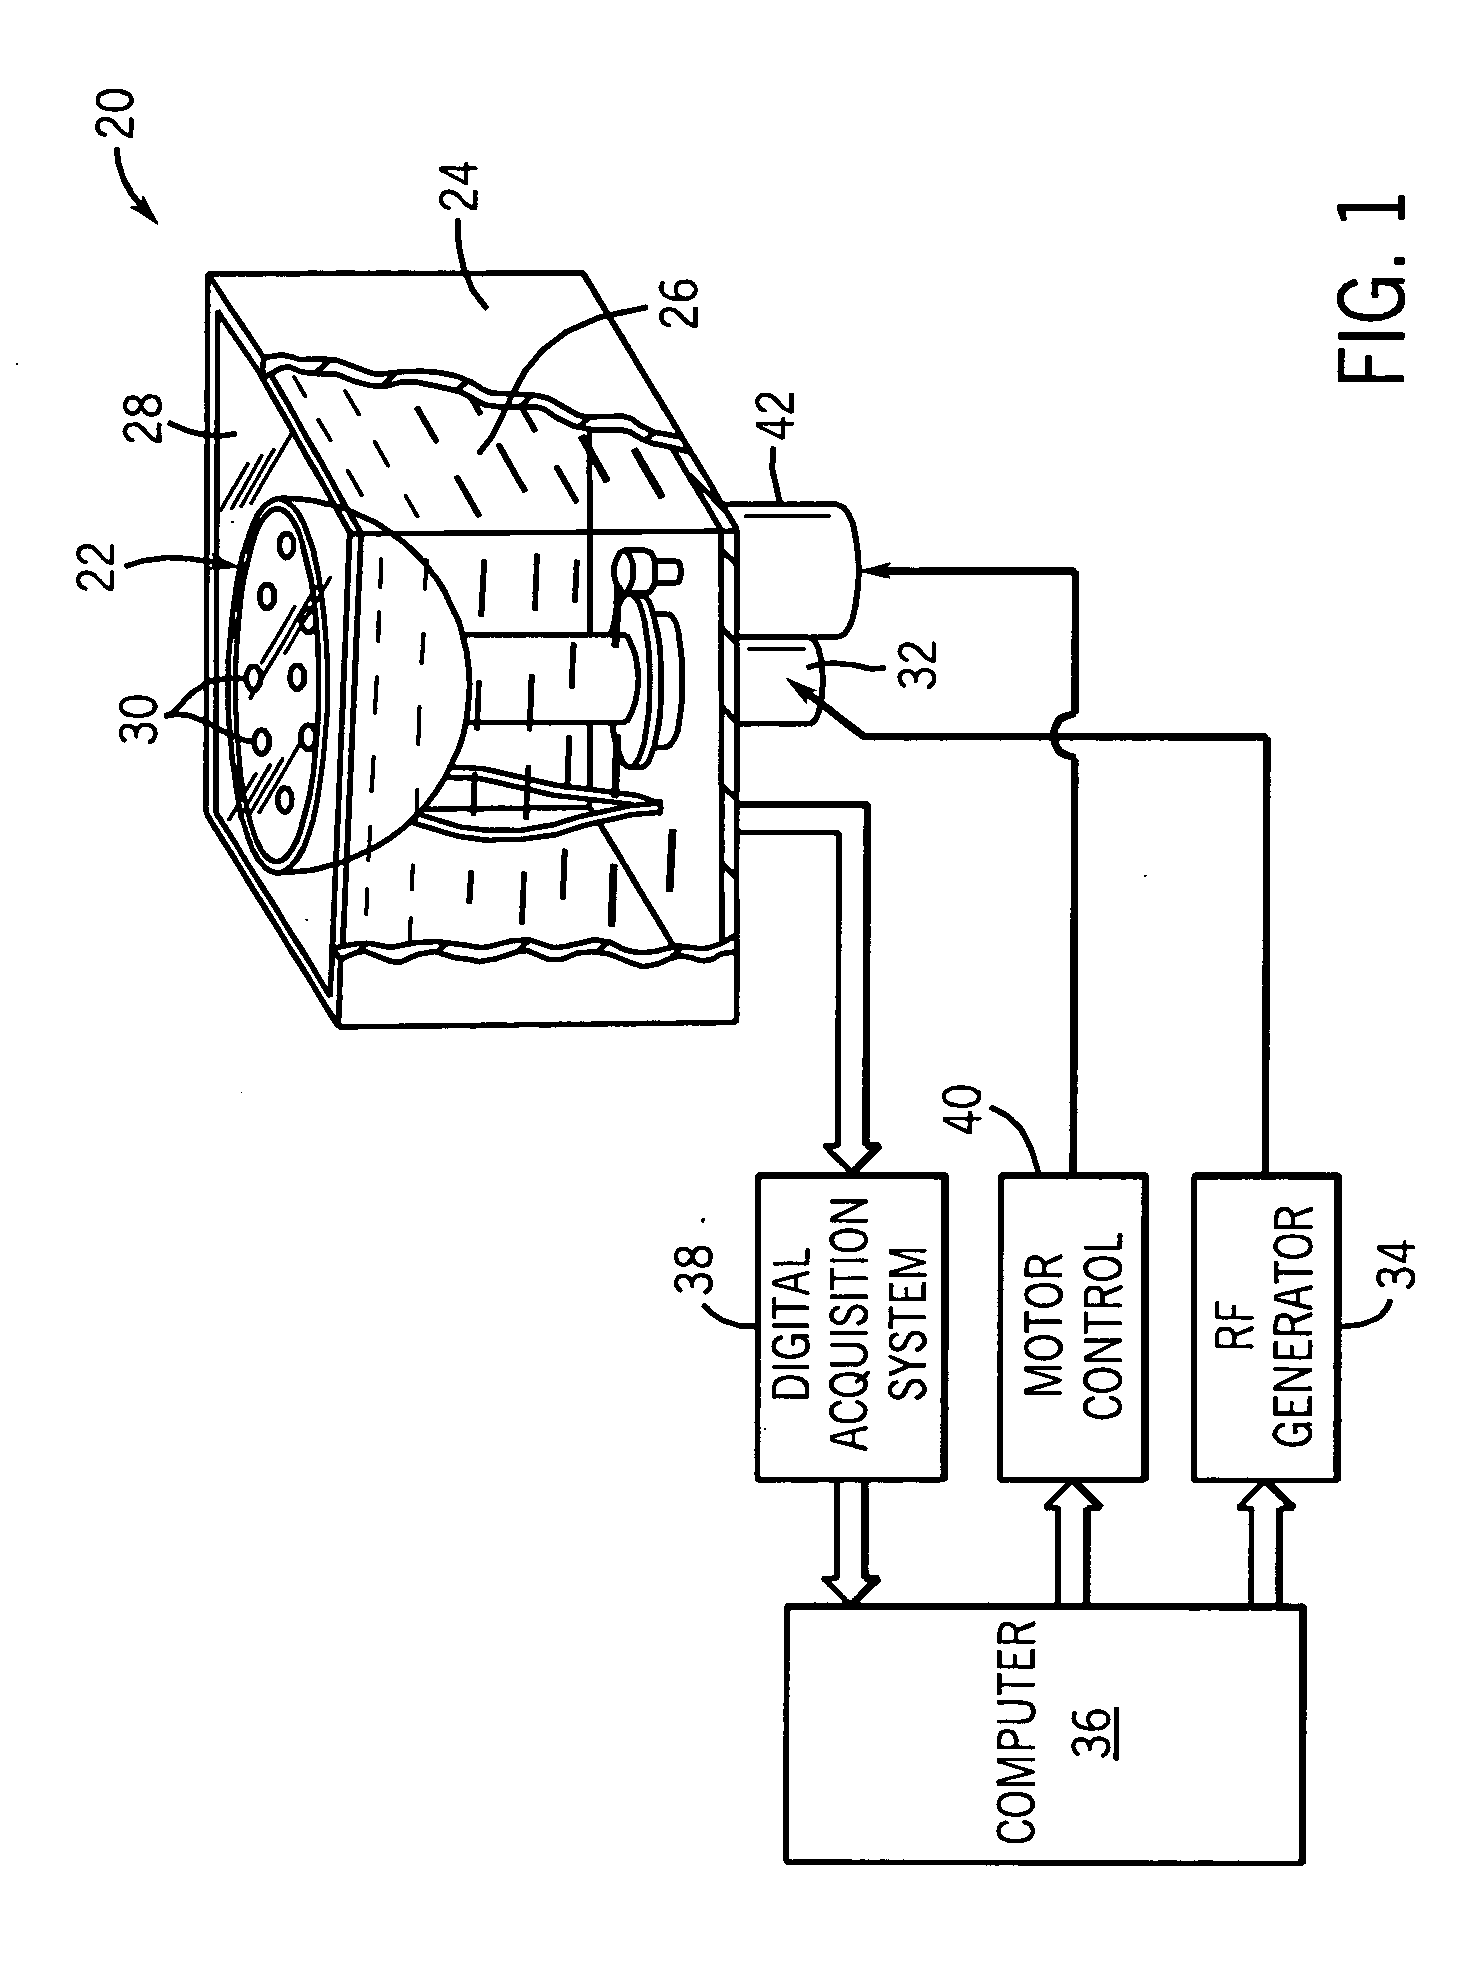 Method and system of thermoacoustic imaging with exact inversion